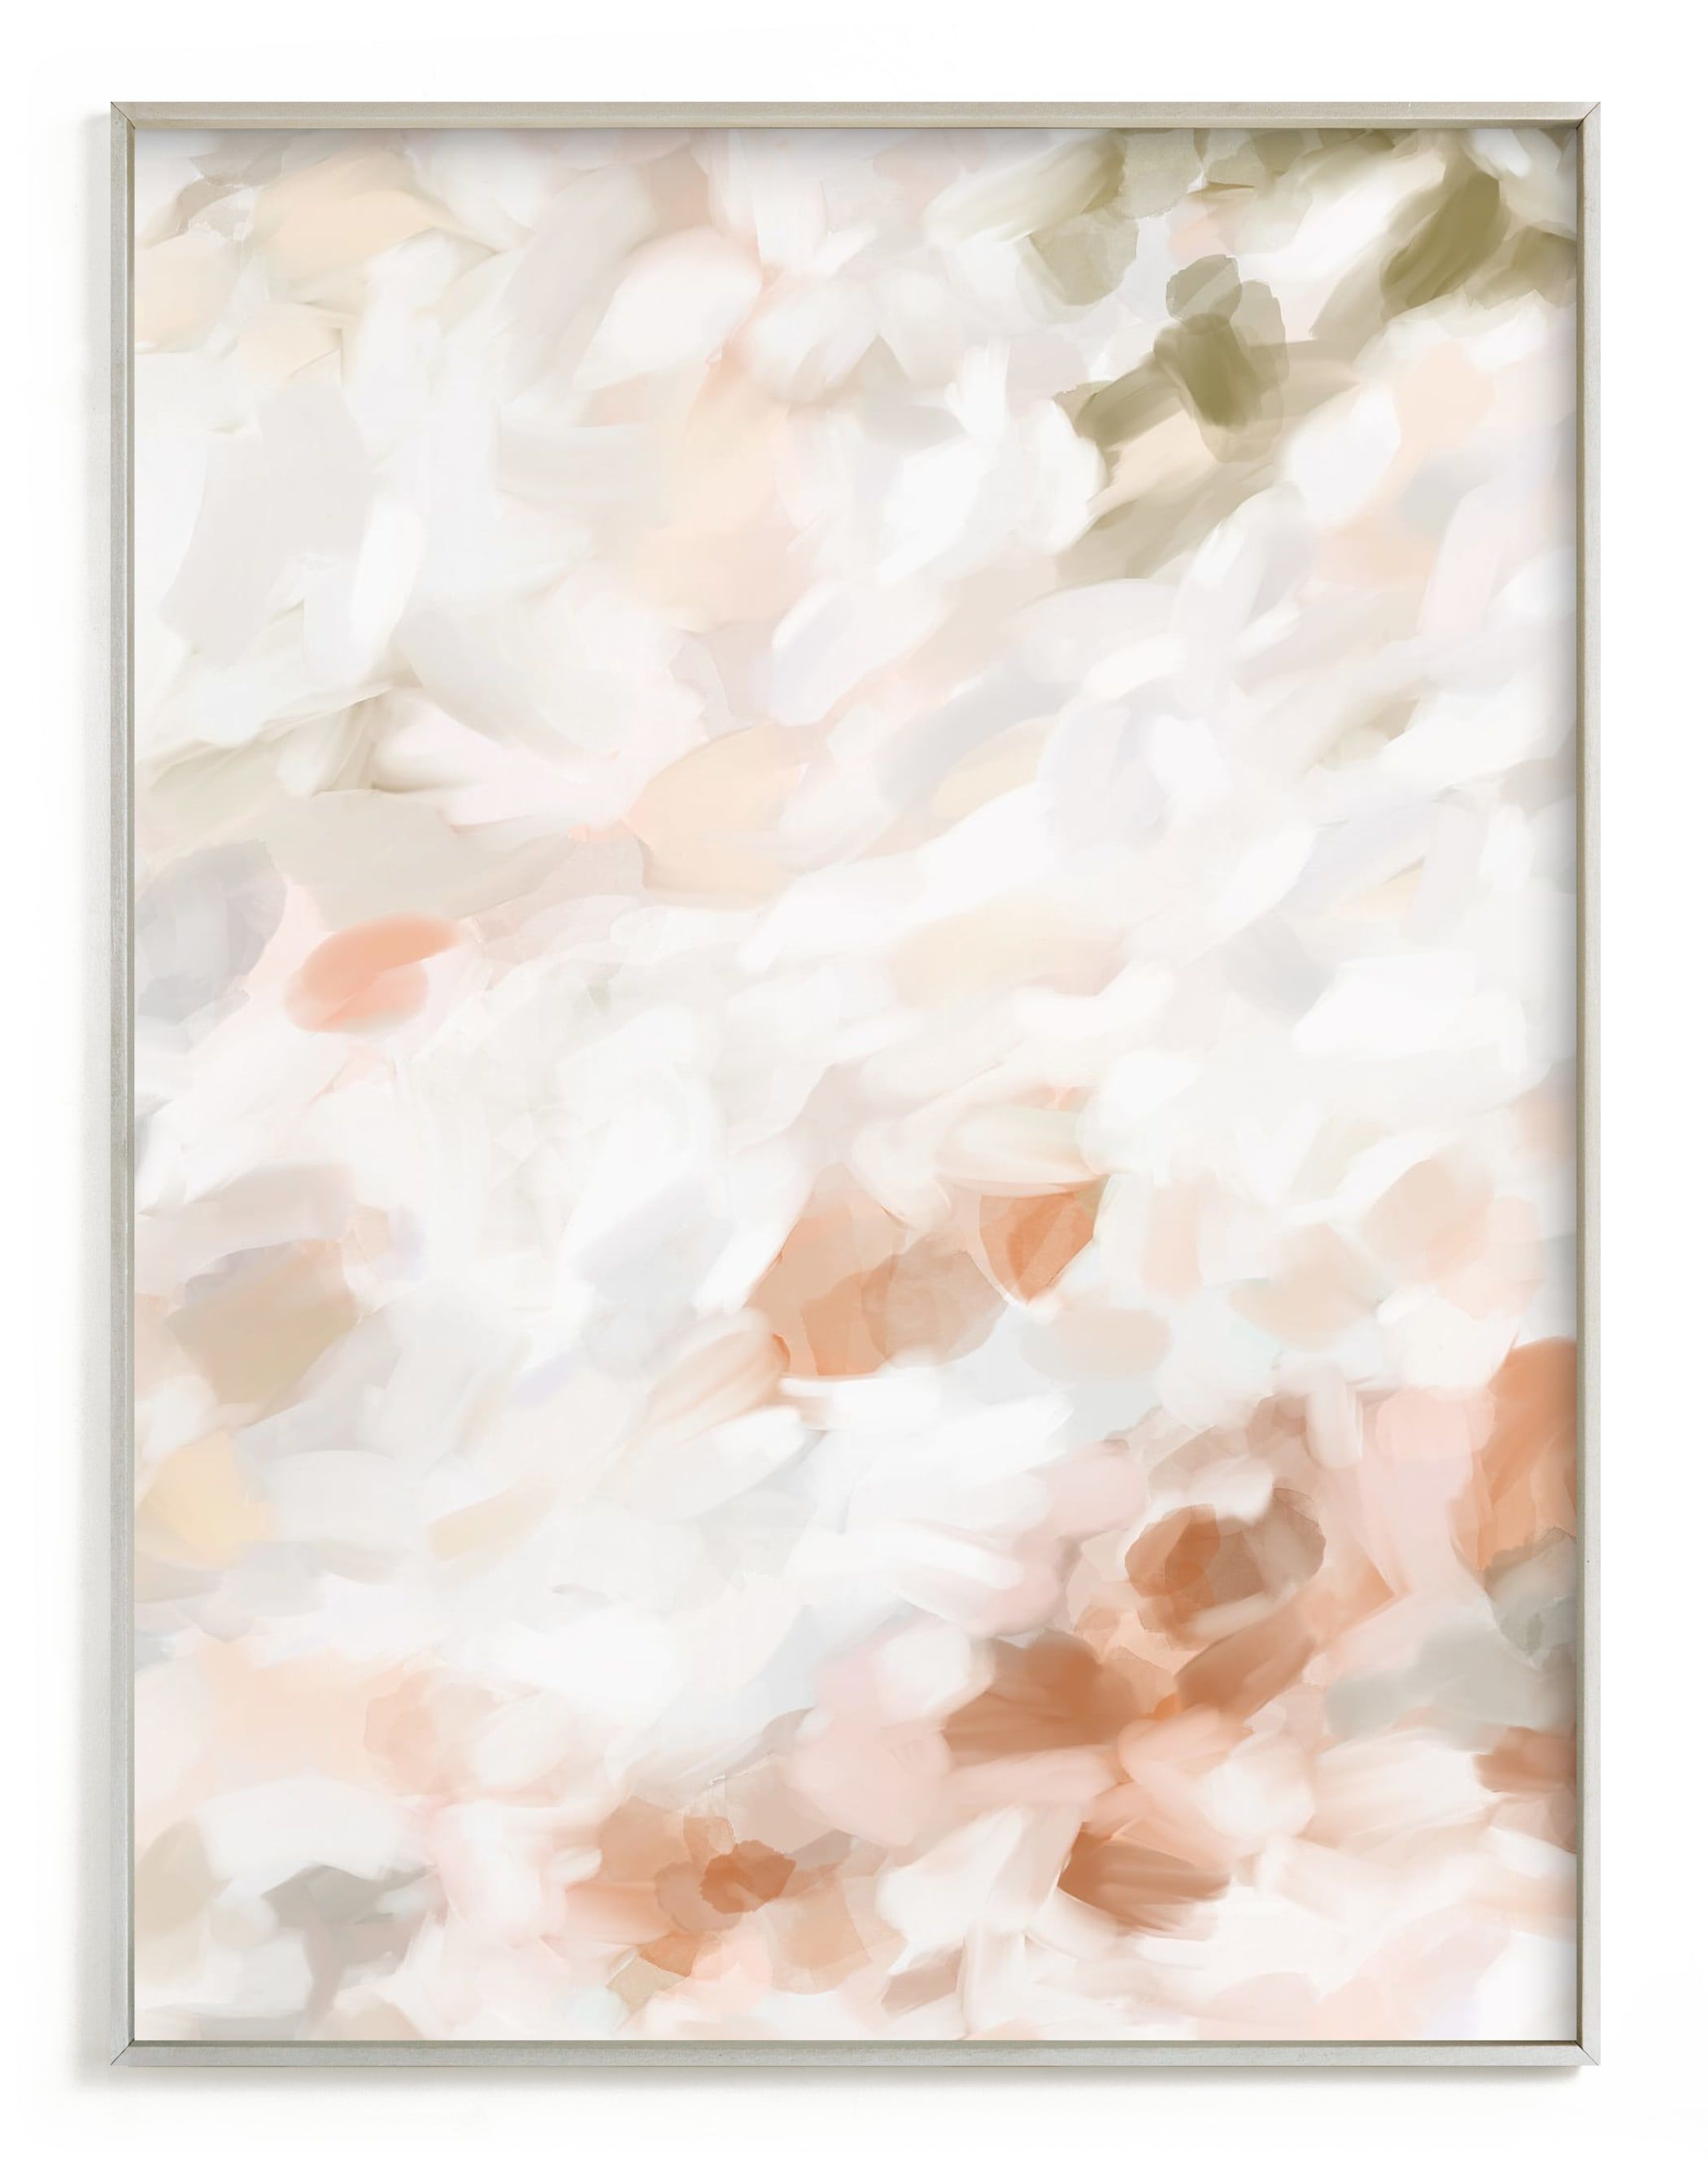 "Whispered 1" - Painting Limited Edition Art Print by Melanie Severin. | Minted